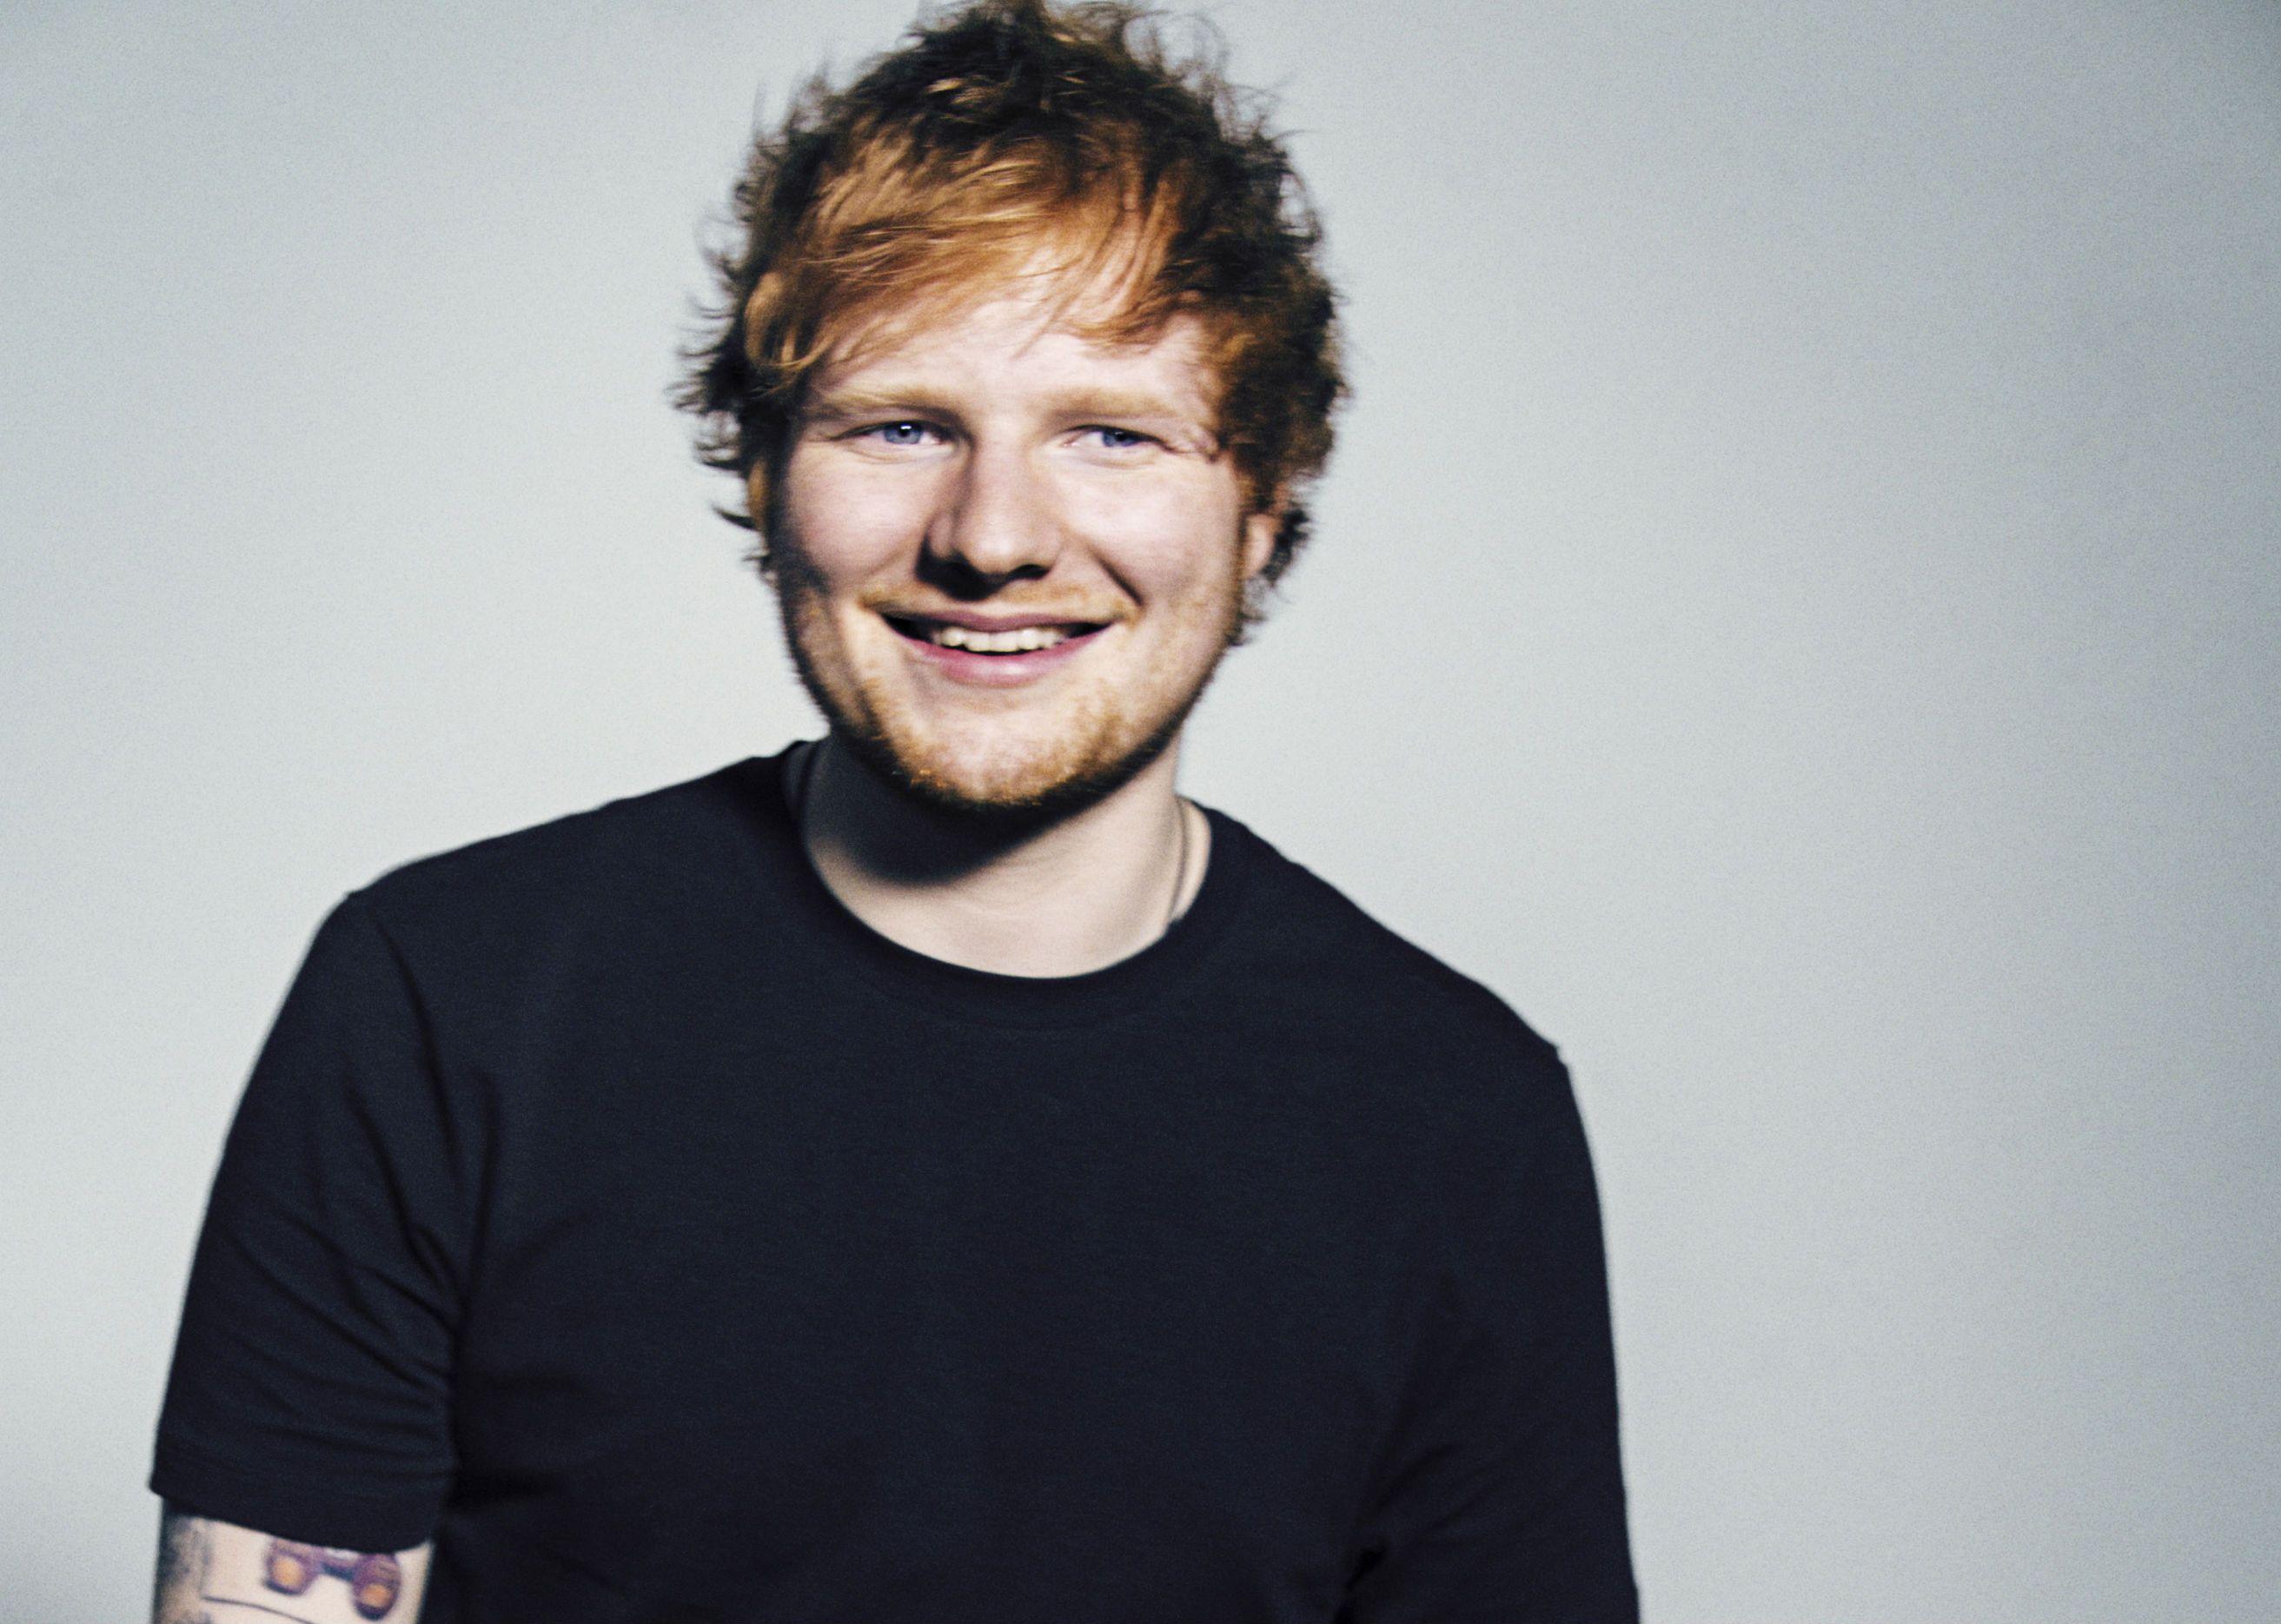 Wallpapers Of The Day: Ed Sheeran